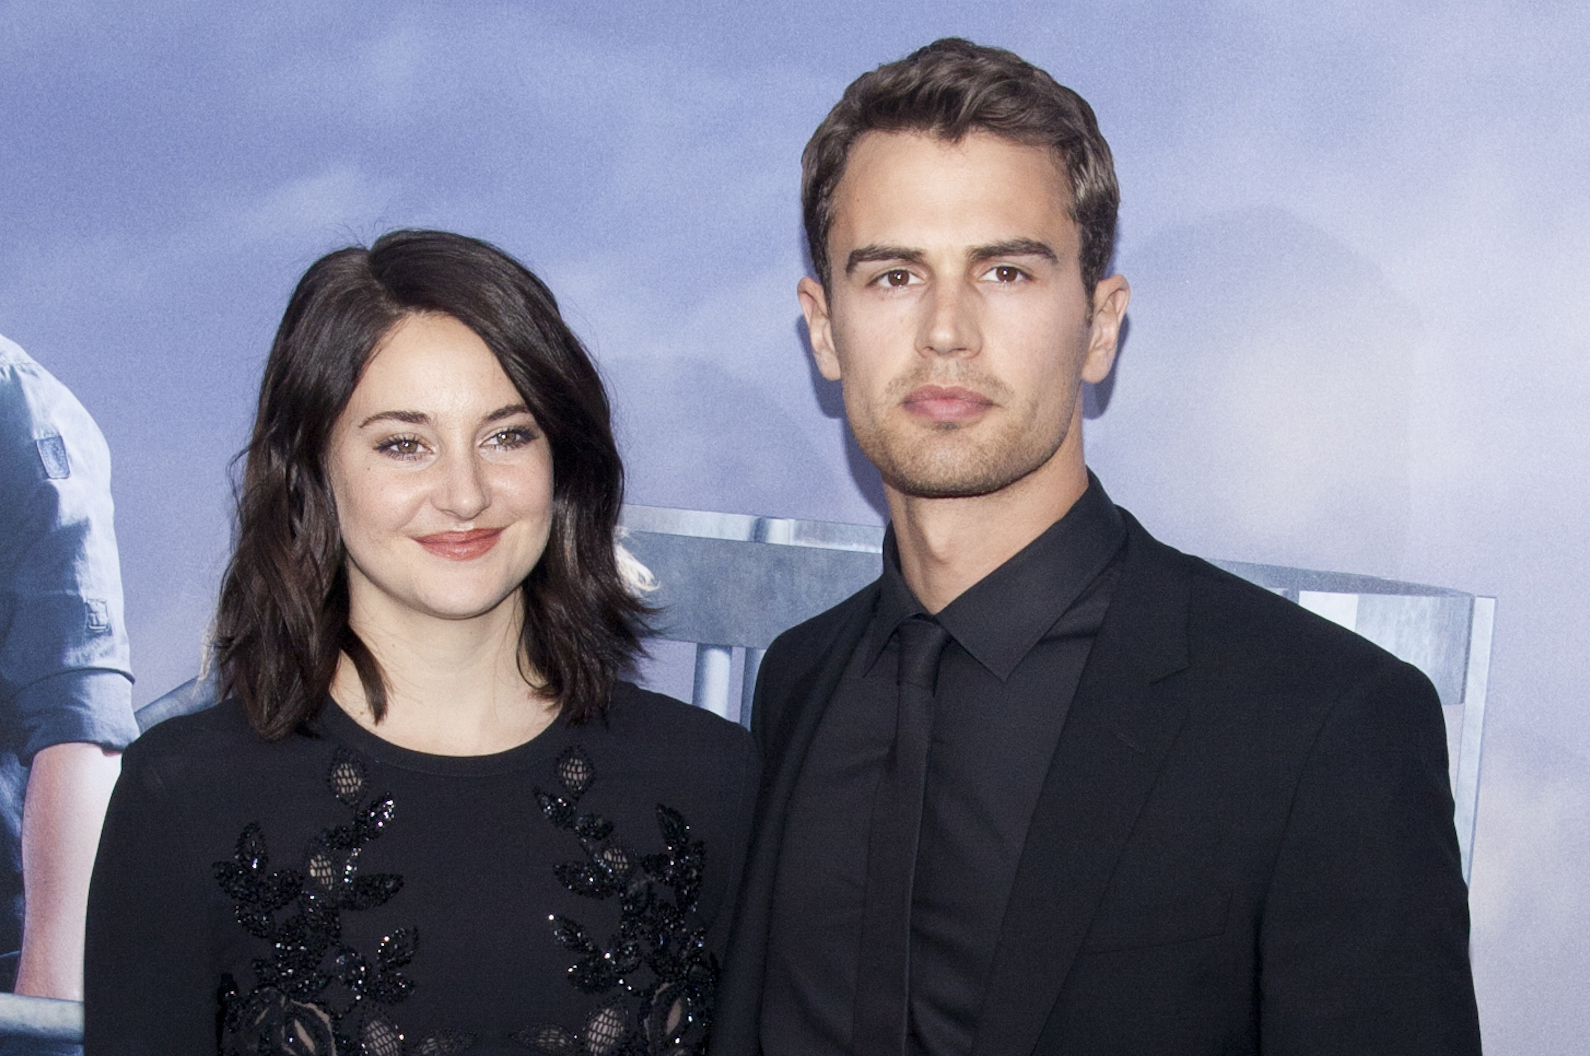 Divergent stars Shailene Woodley and Theo James